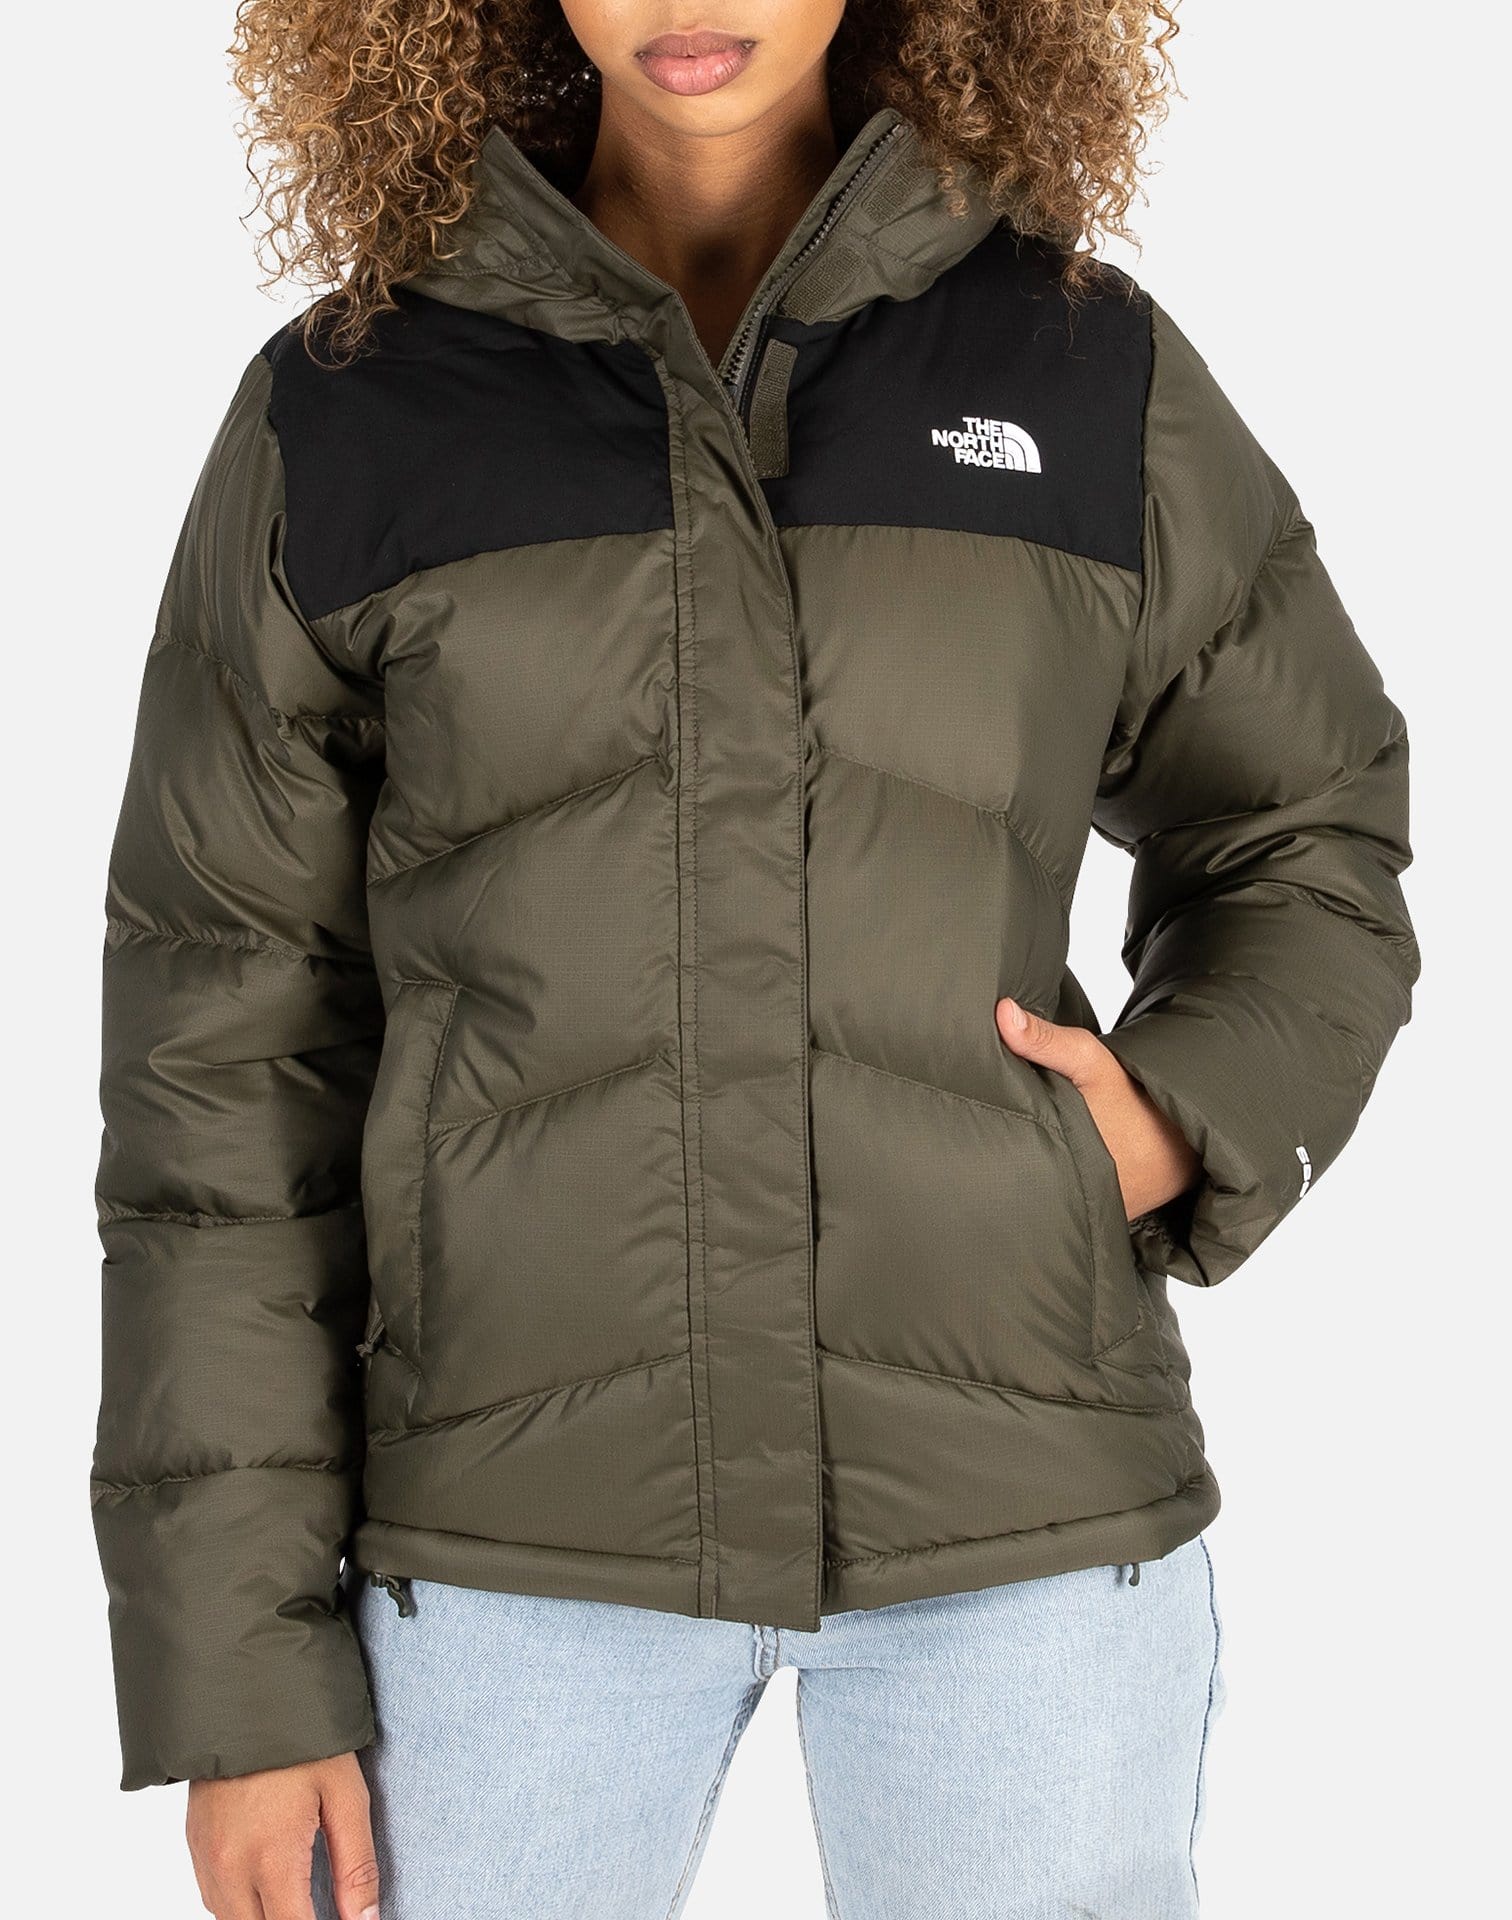 The North Face BALHAM INSULATED JACKET  - Green - Size: LG